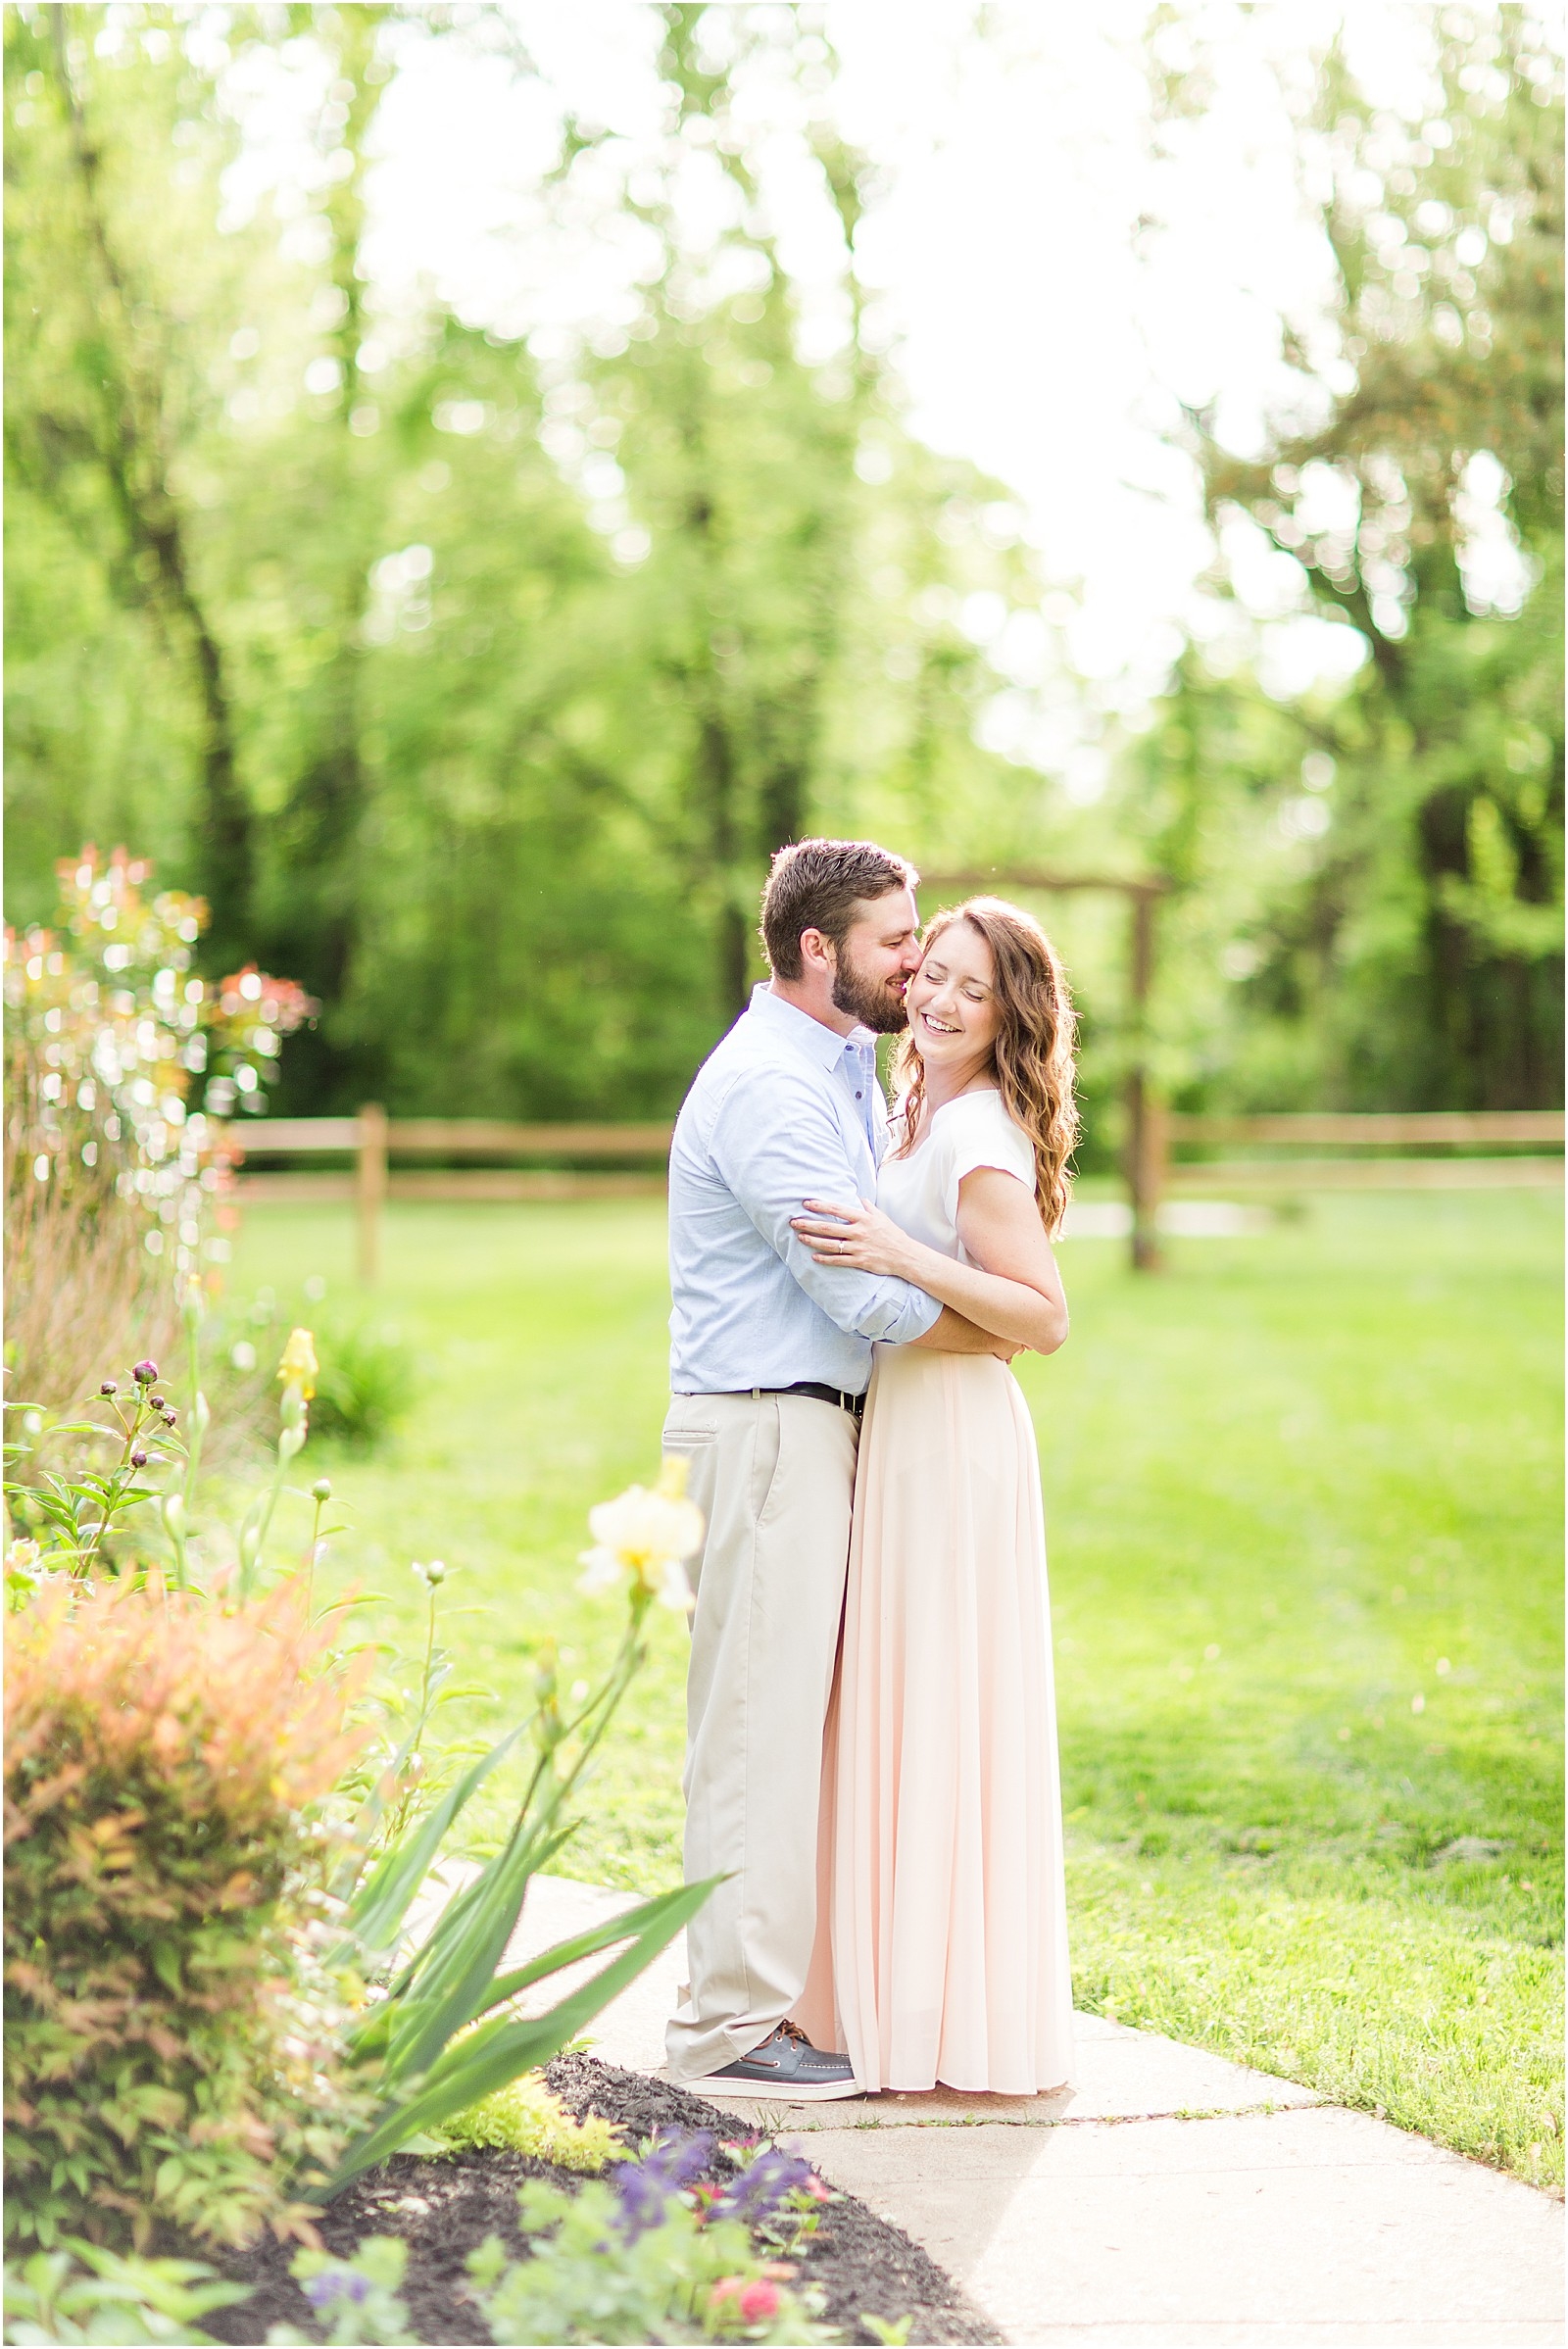 Bailey and Ben | Evansville Engagement Session | Bret and Brandie 001.jpg